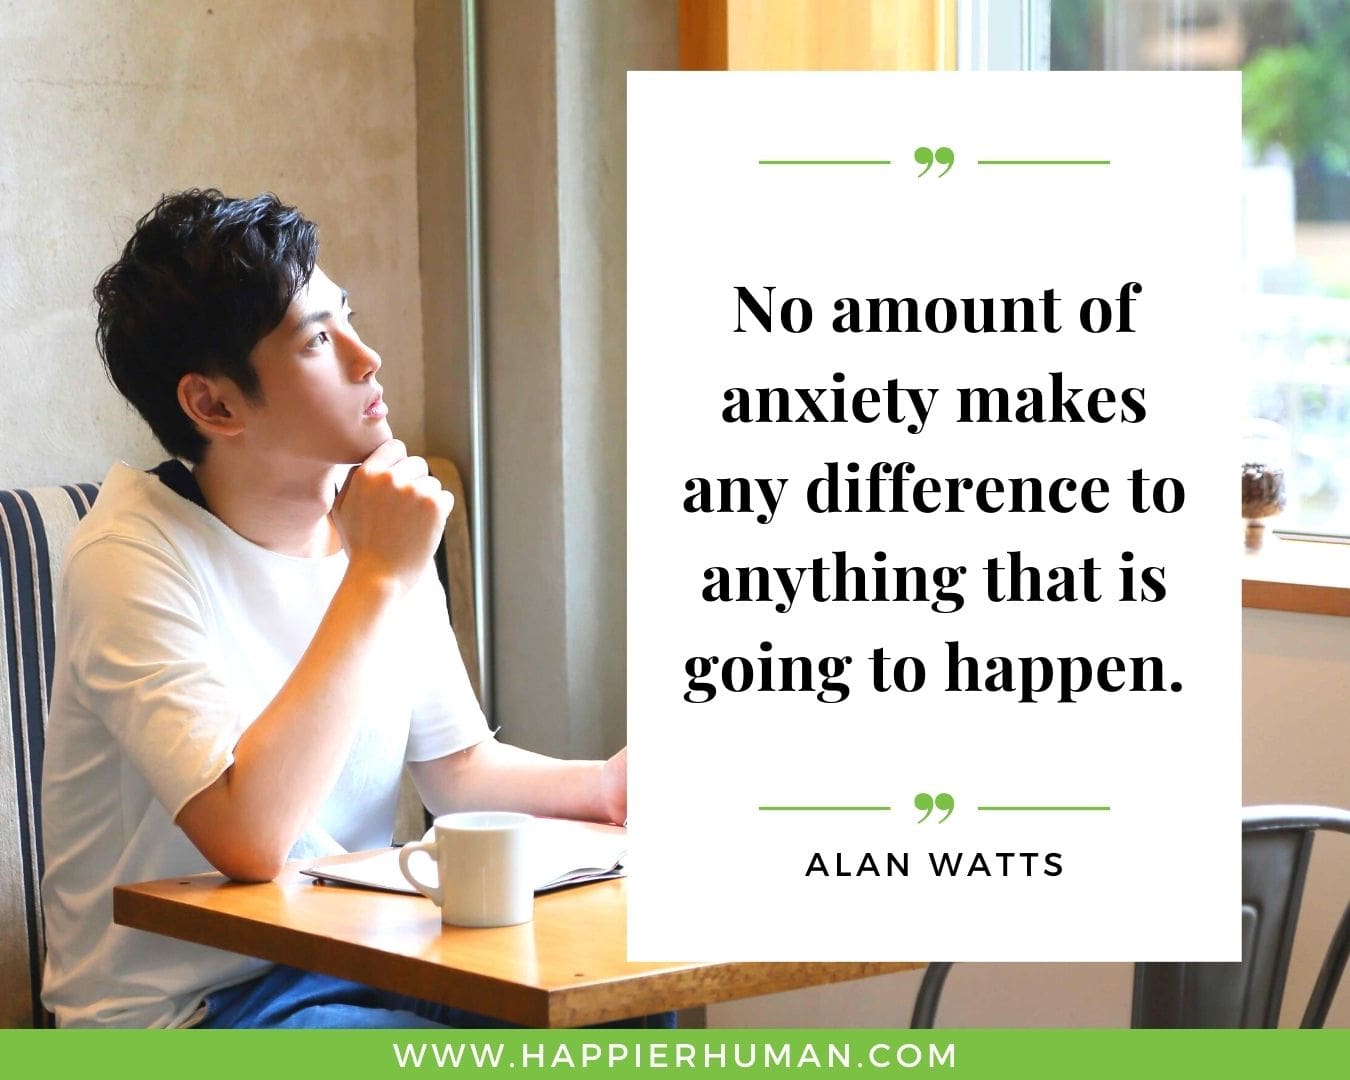 Overthinking Quotes - "No amount of anxiety makes any difference to anything that is going to happen." - Alan Watts.